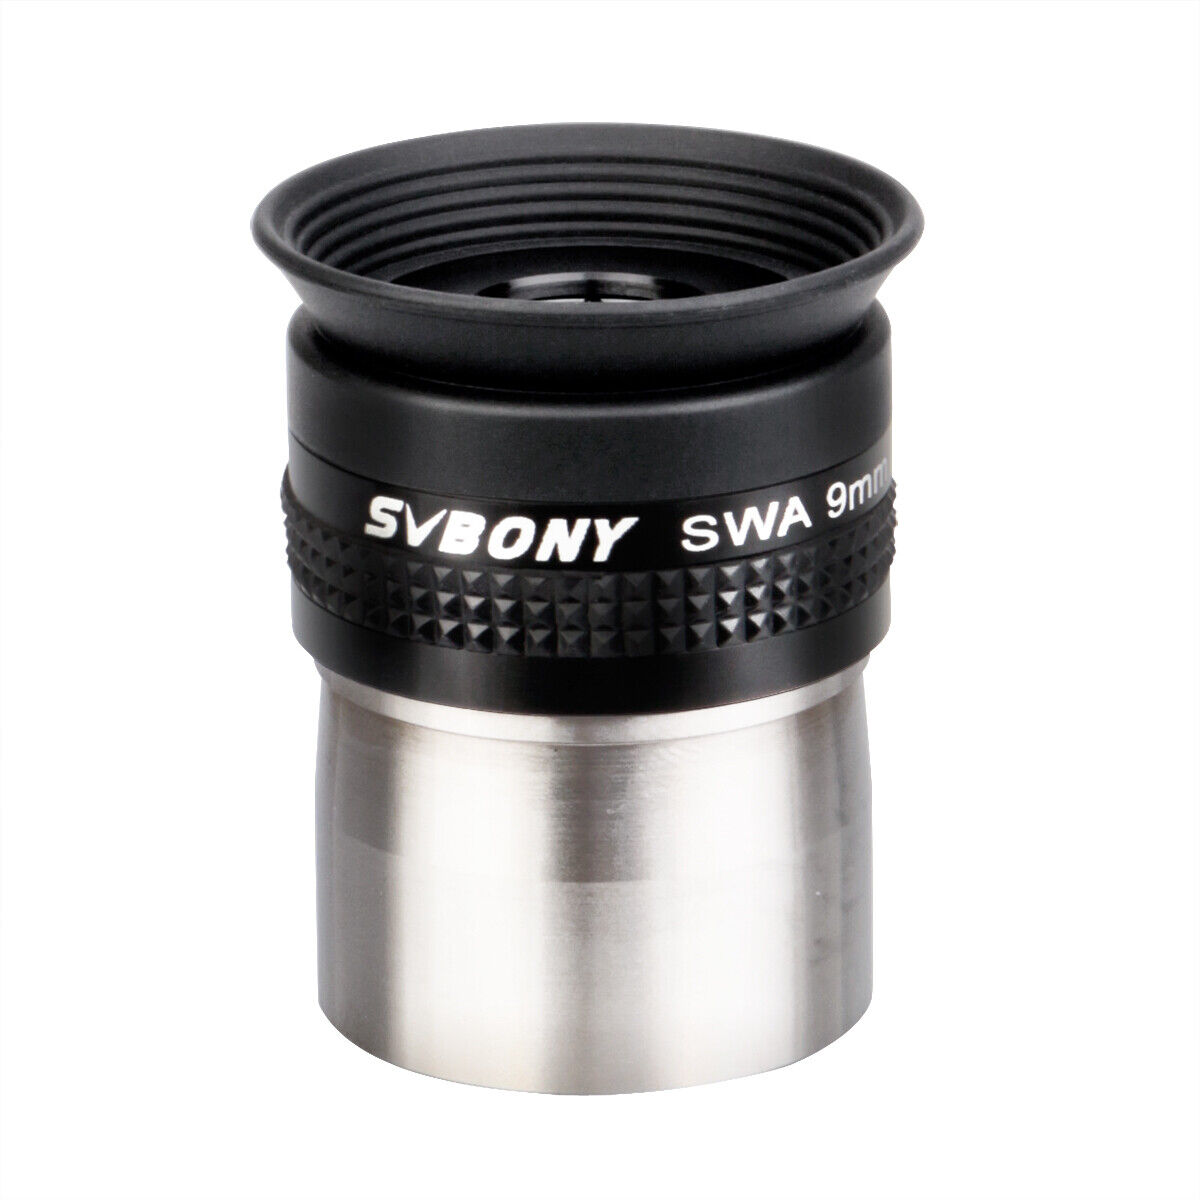 1pcs 9mm 1.25 inch 72-Degree Super-wide Angle lens FMC Asrtro Telescope Eyepiece